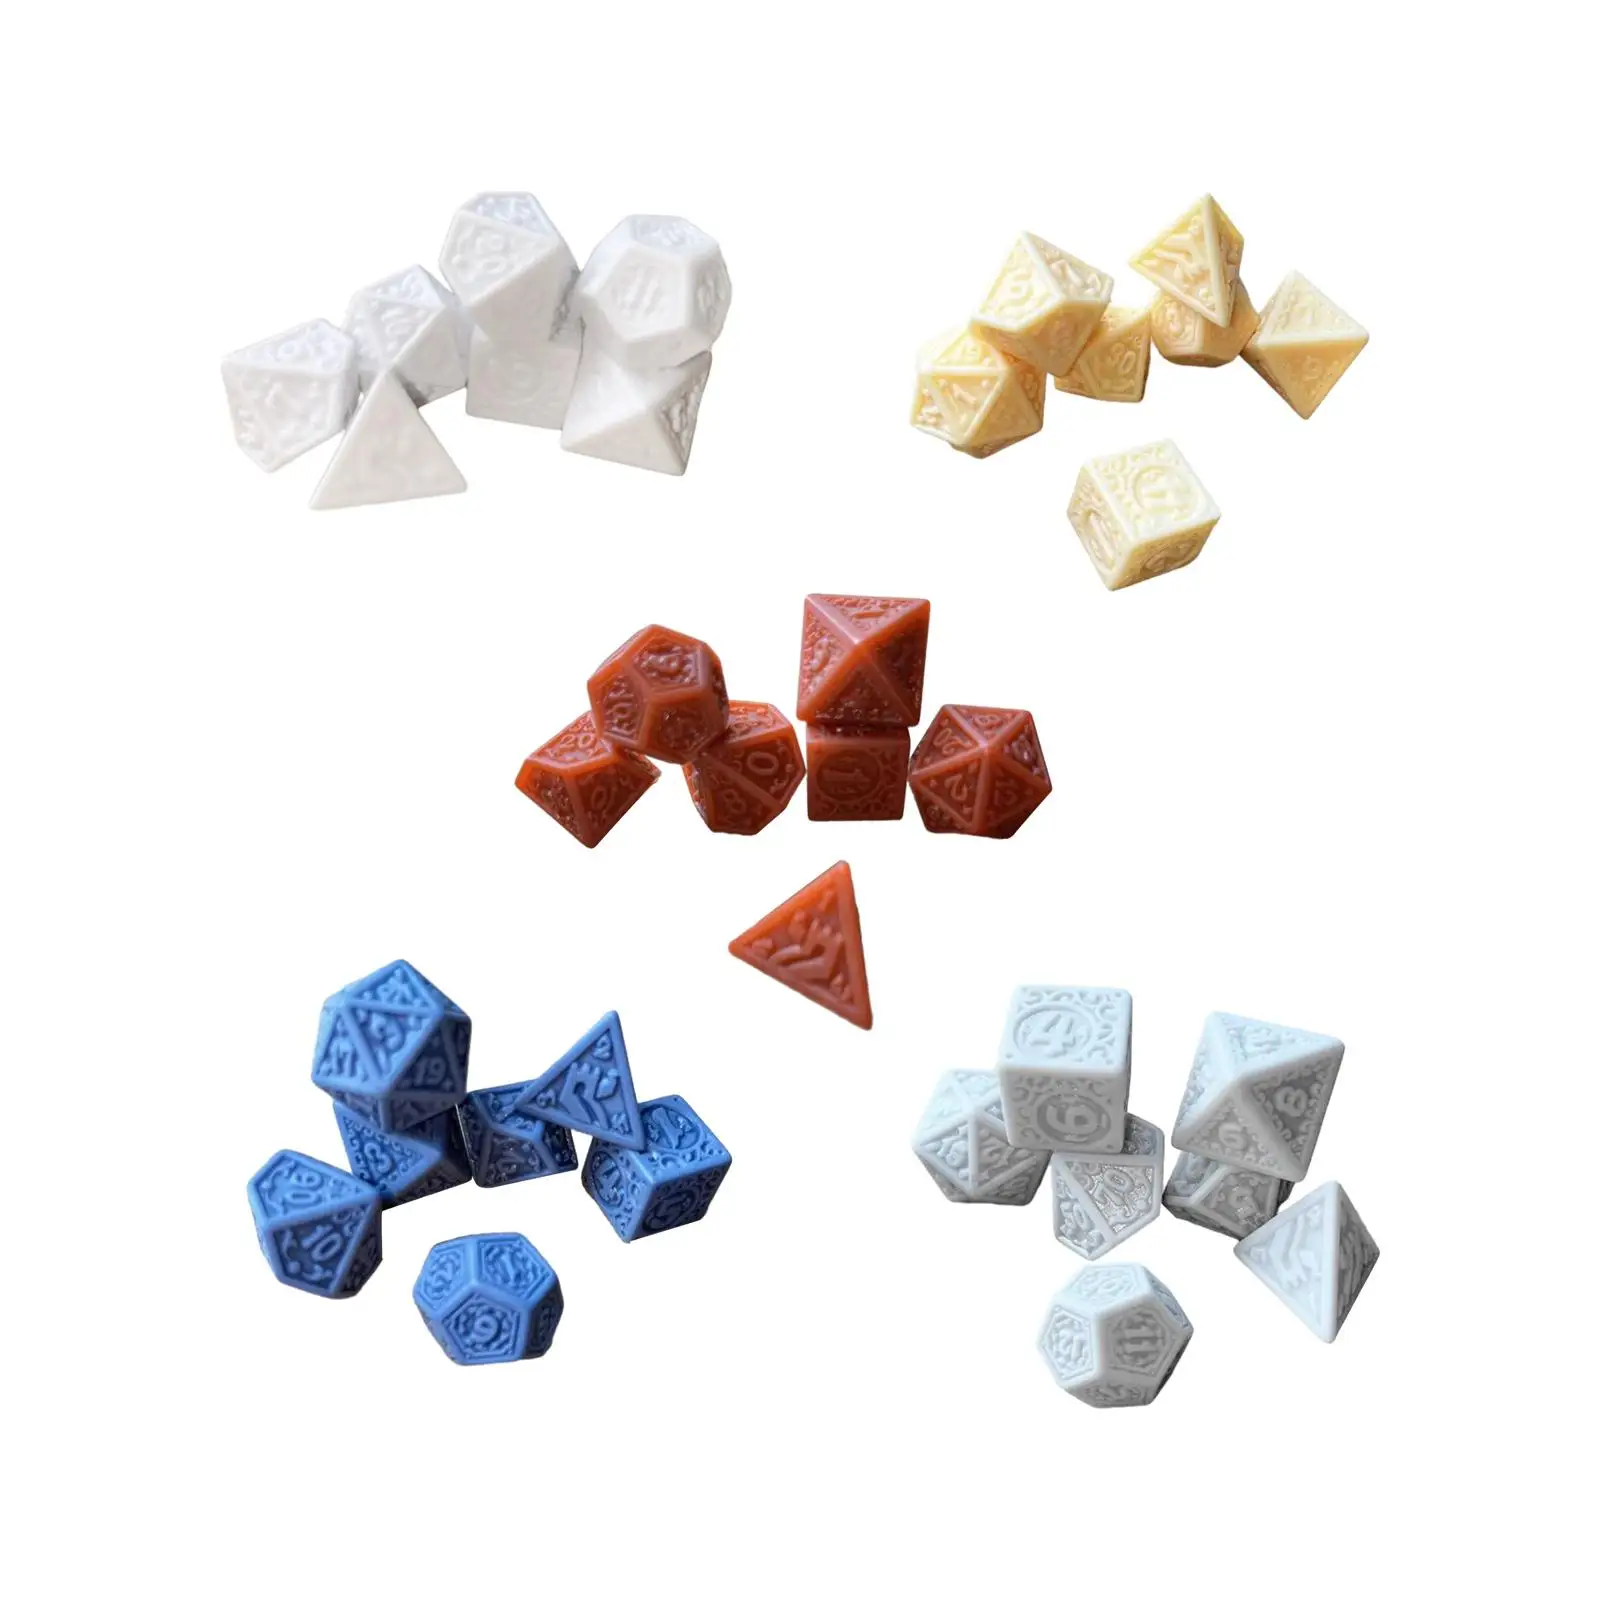 7x Game Dices Set D20 D12 D10 D8 D6 D4 Party Supplies Entertainment Toys Polyhedral Dices for KTV Bar Board Game Table Game